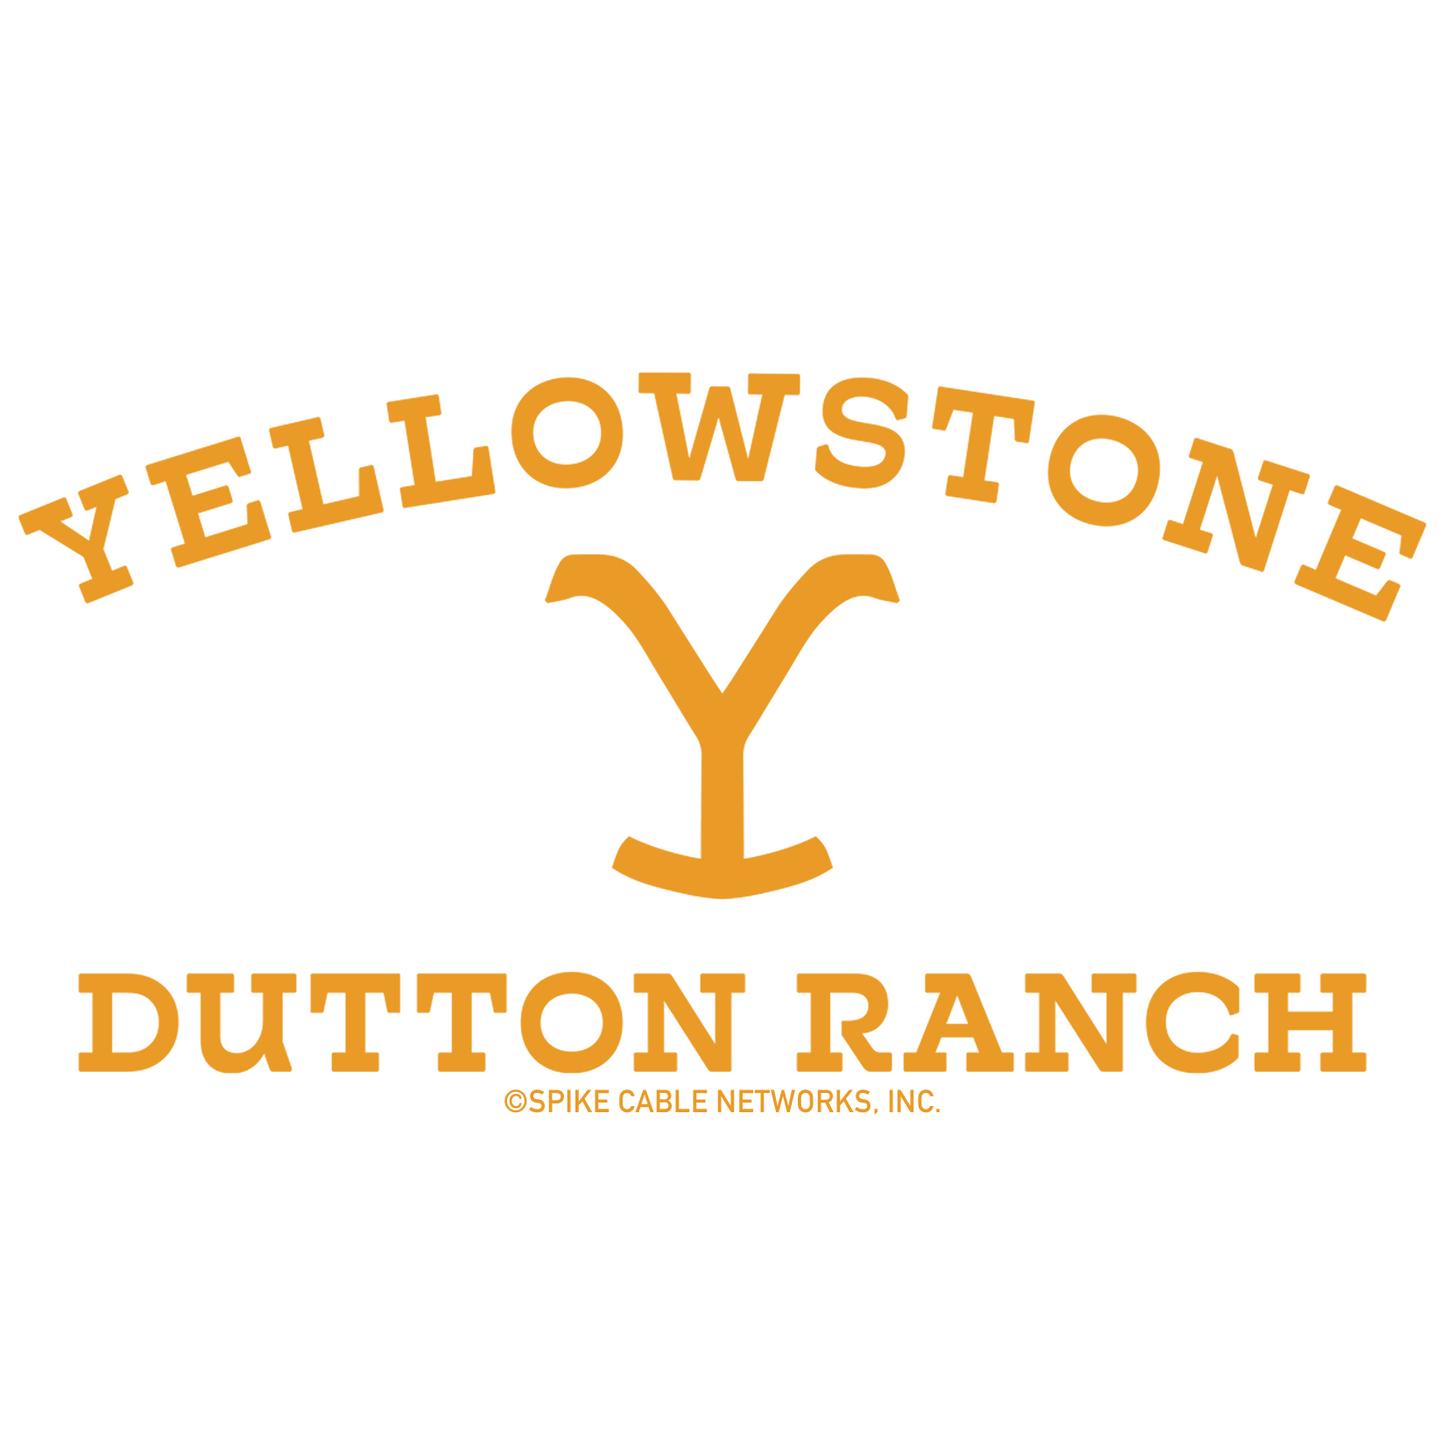 Yellowstone Logo Sticker Assorted Pack of 3 - Paramount Shop